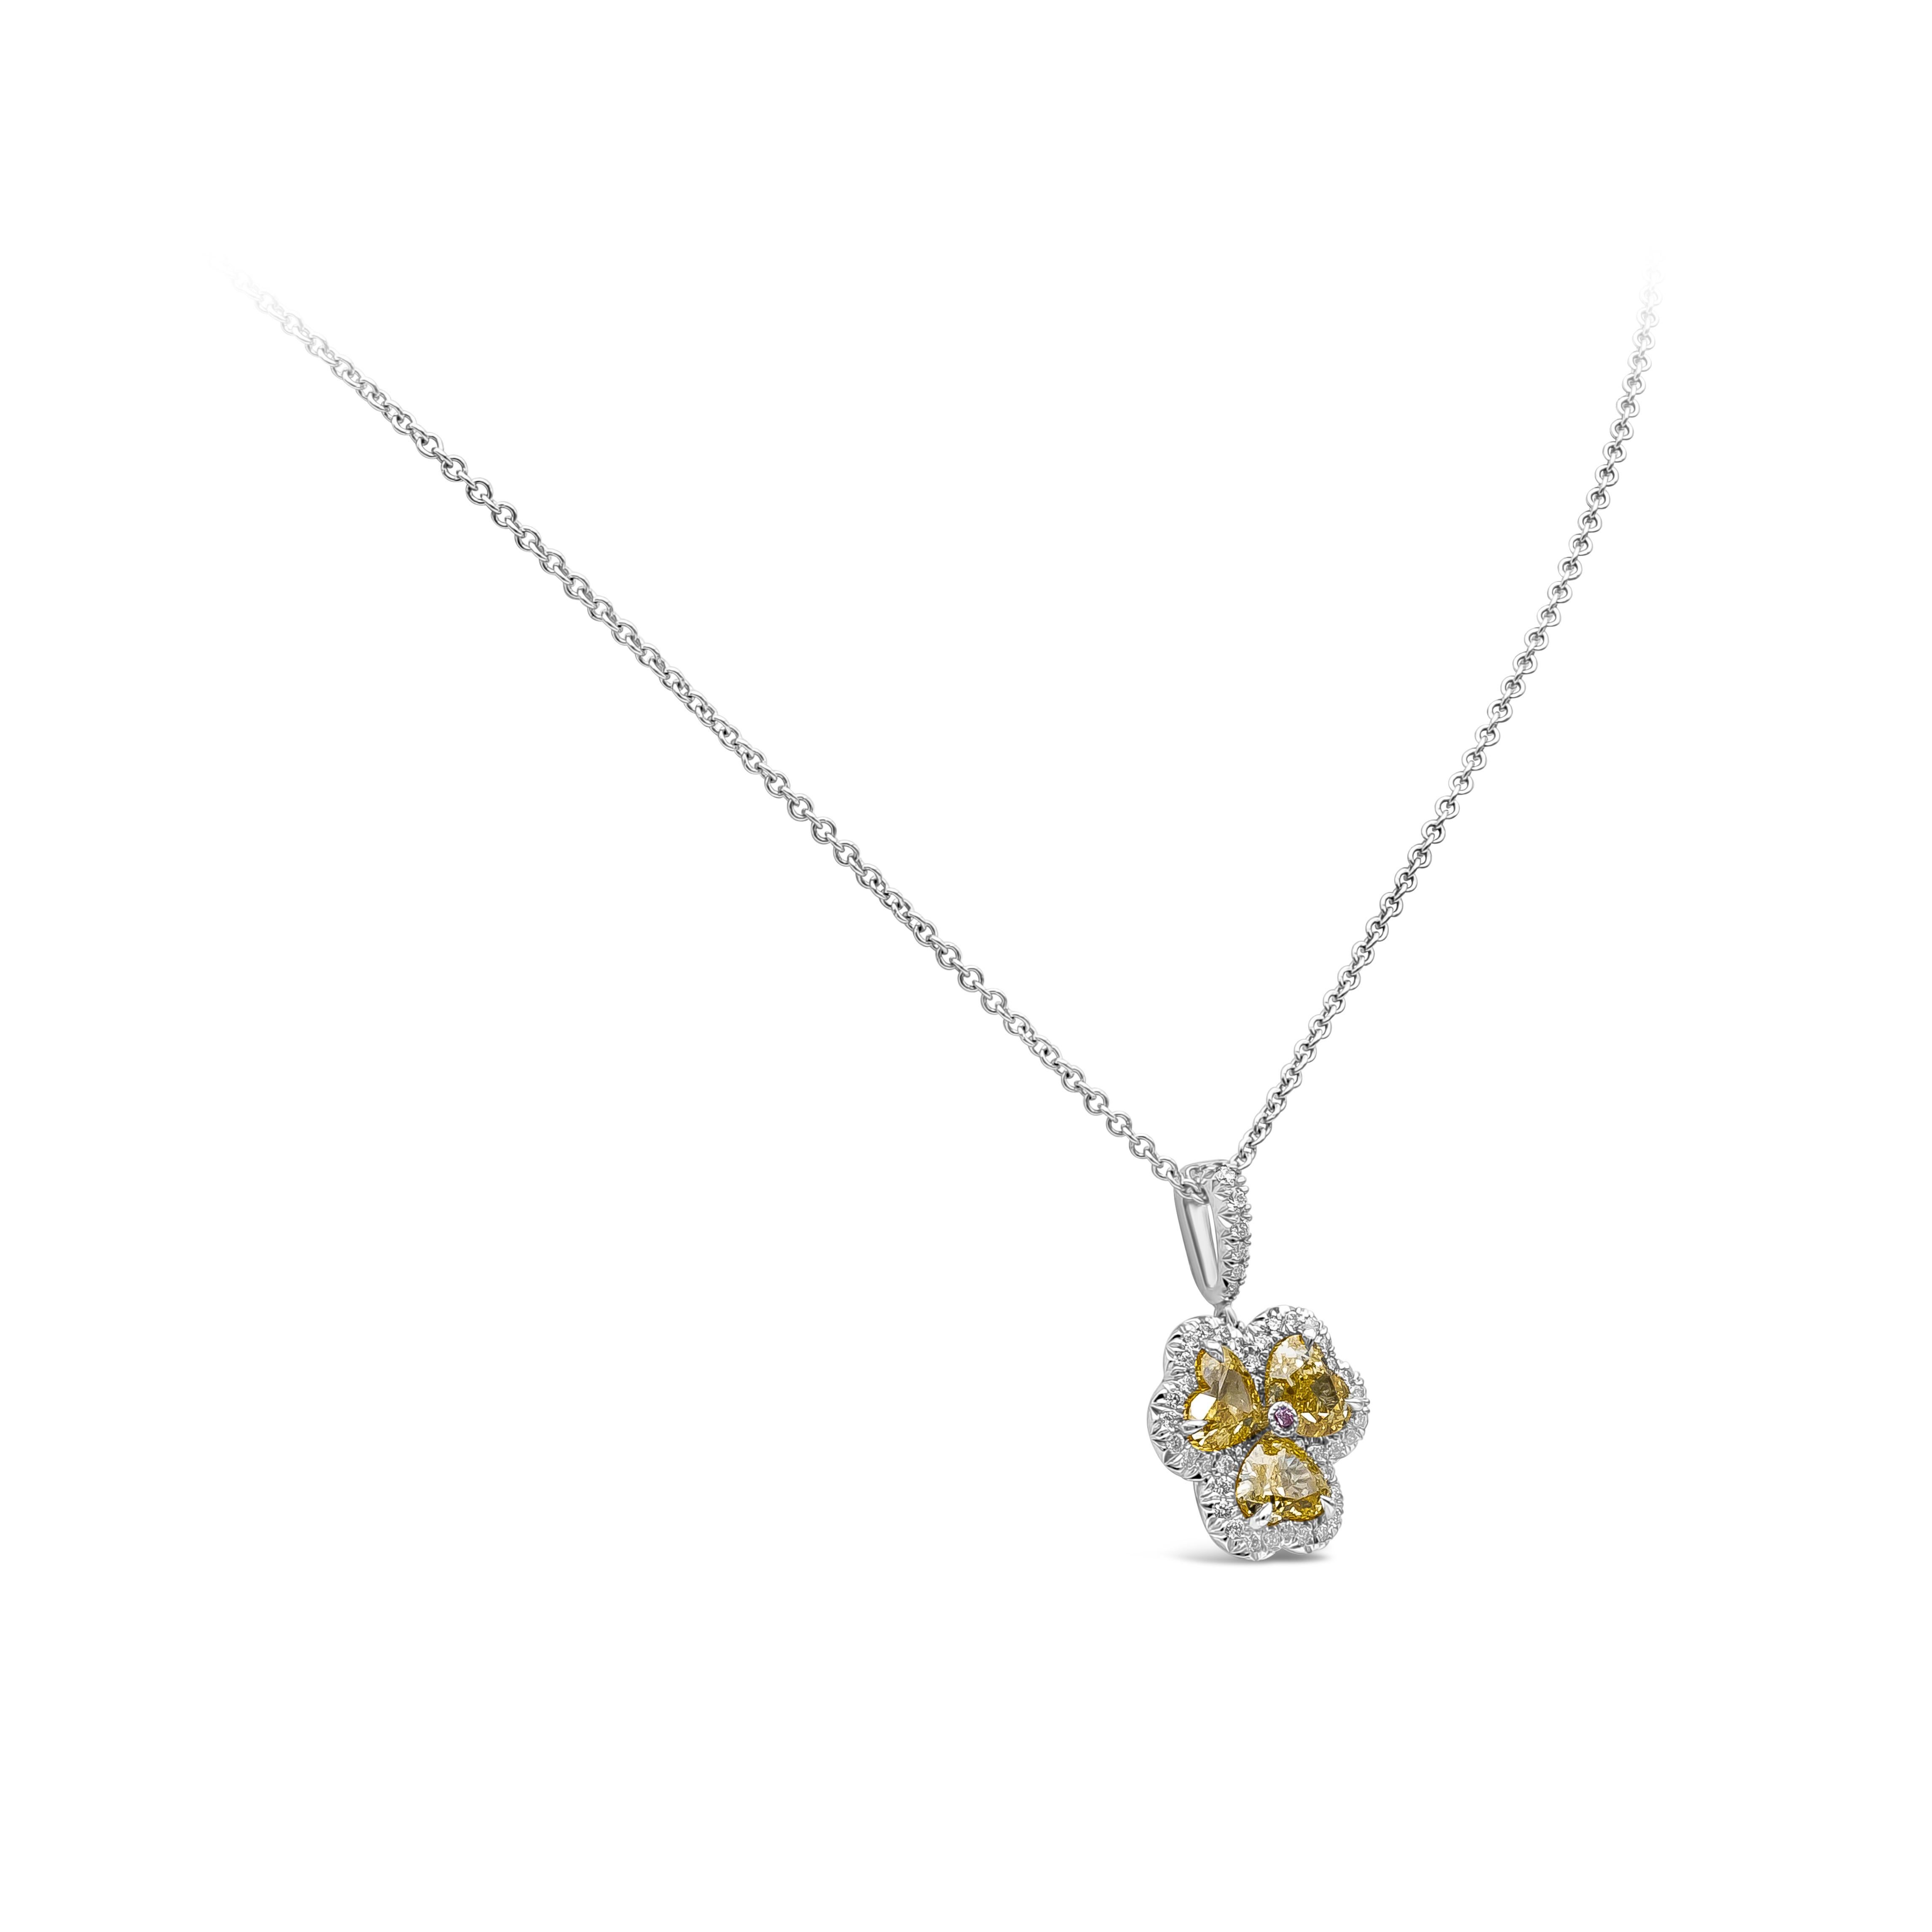 A simple yet beautiful pendant necklace showcasing 3 fancy yellow color clover shape cut diamonds set in a flower designed setting. Each heart shape cut diamonds is accented by a single row of round brilliant diamonds. Fancy yellow color heart shape